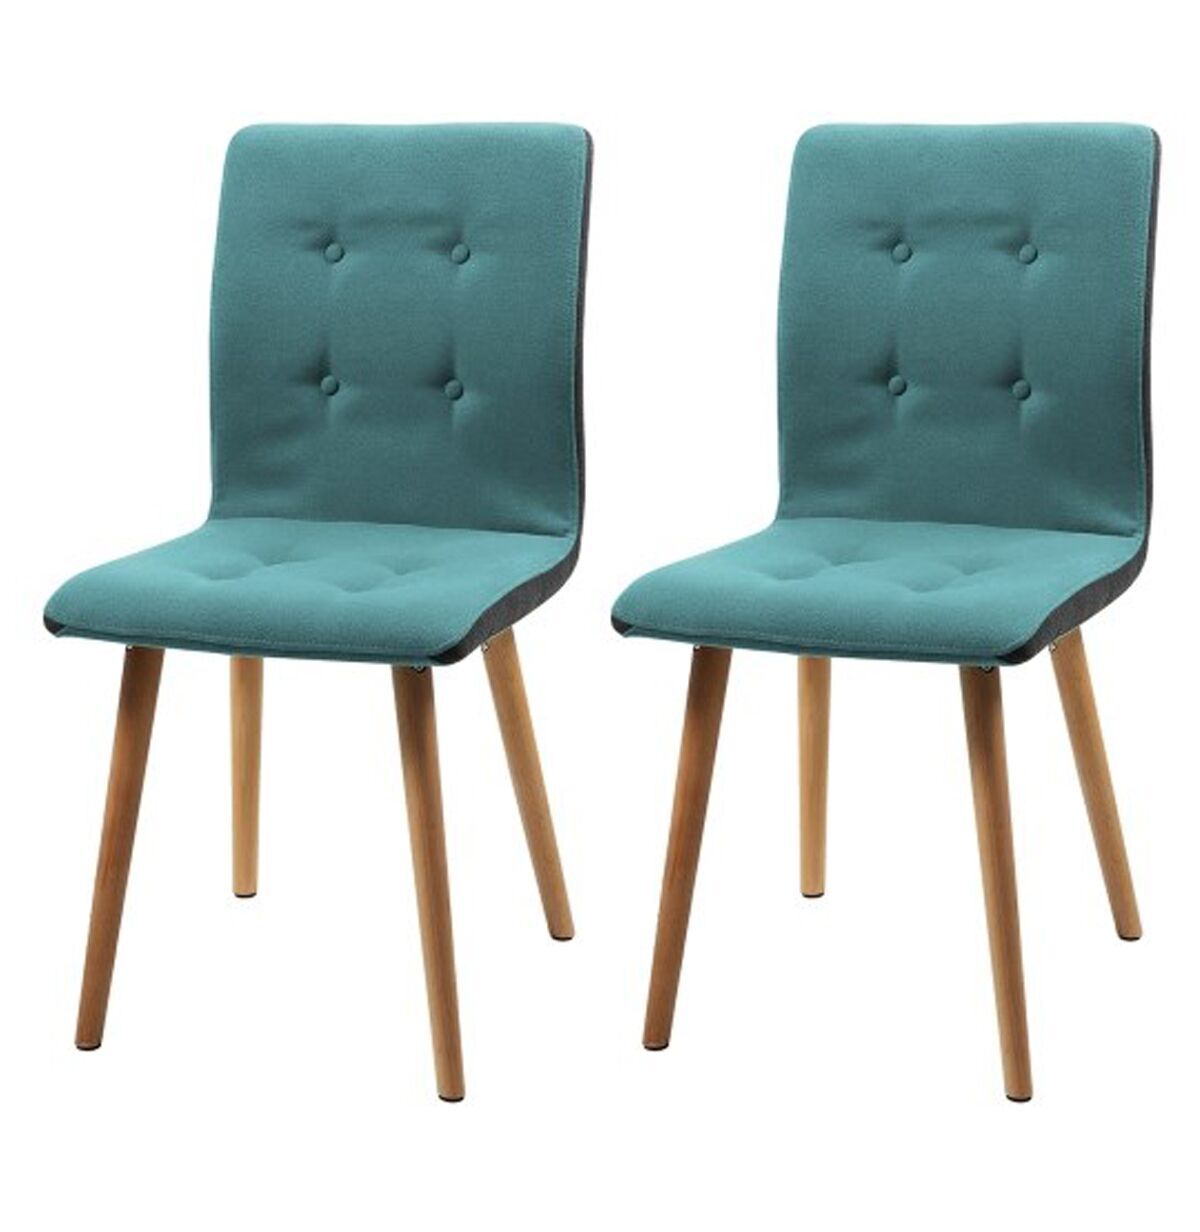 Frida Fabric Teal Dining Chairs | Dining Chairs | FADS